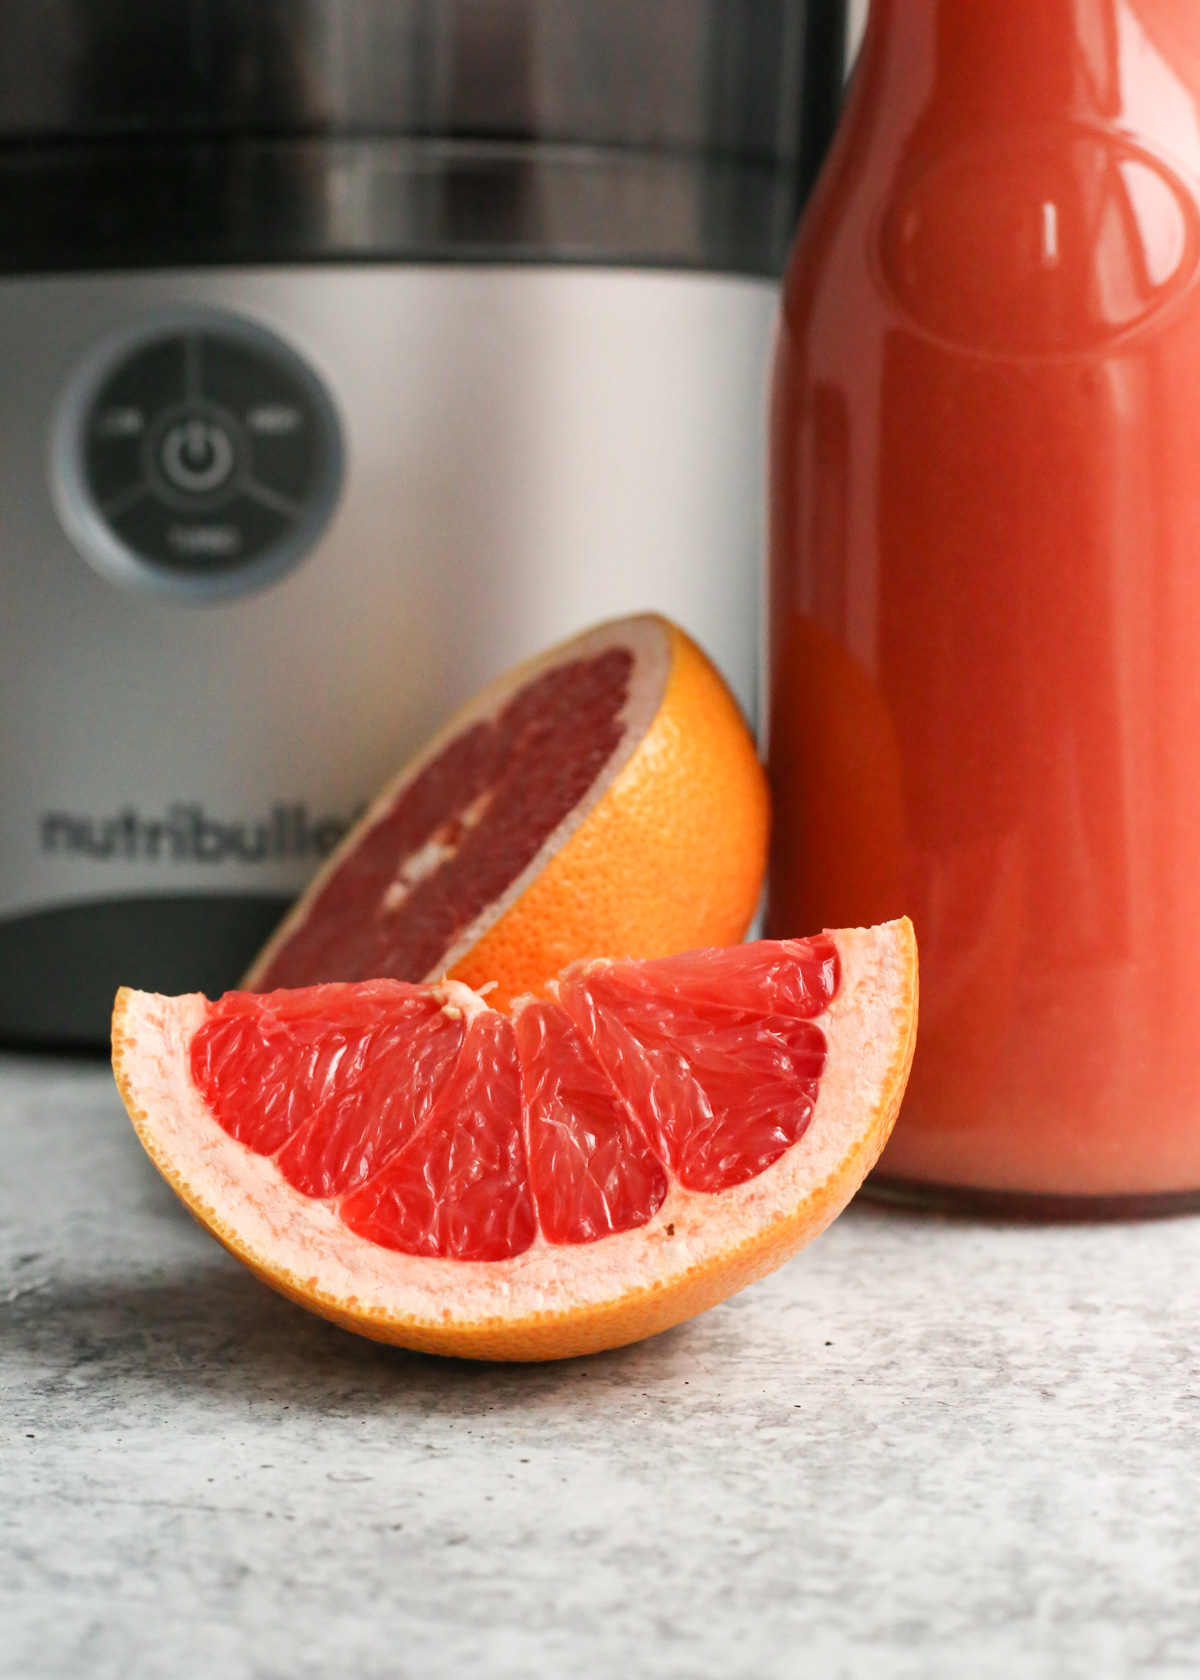 A close up shot of a wedge of grapefruit sitting in front of a juicing machine on a kitchen countertop, revealing the juicy segments that are richly colored in a bright, vibrant red hue